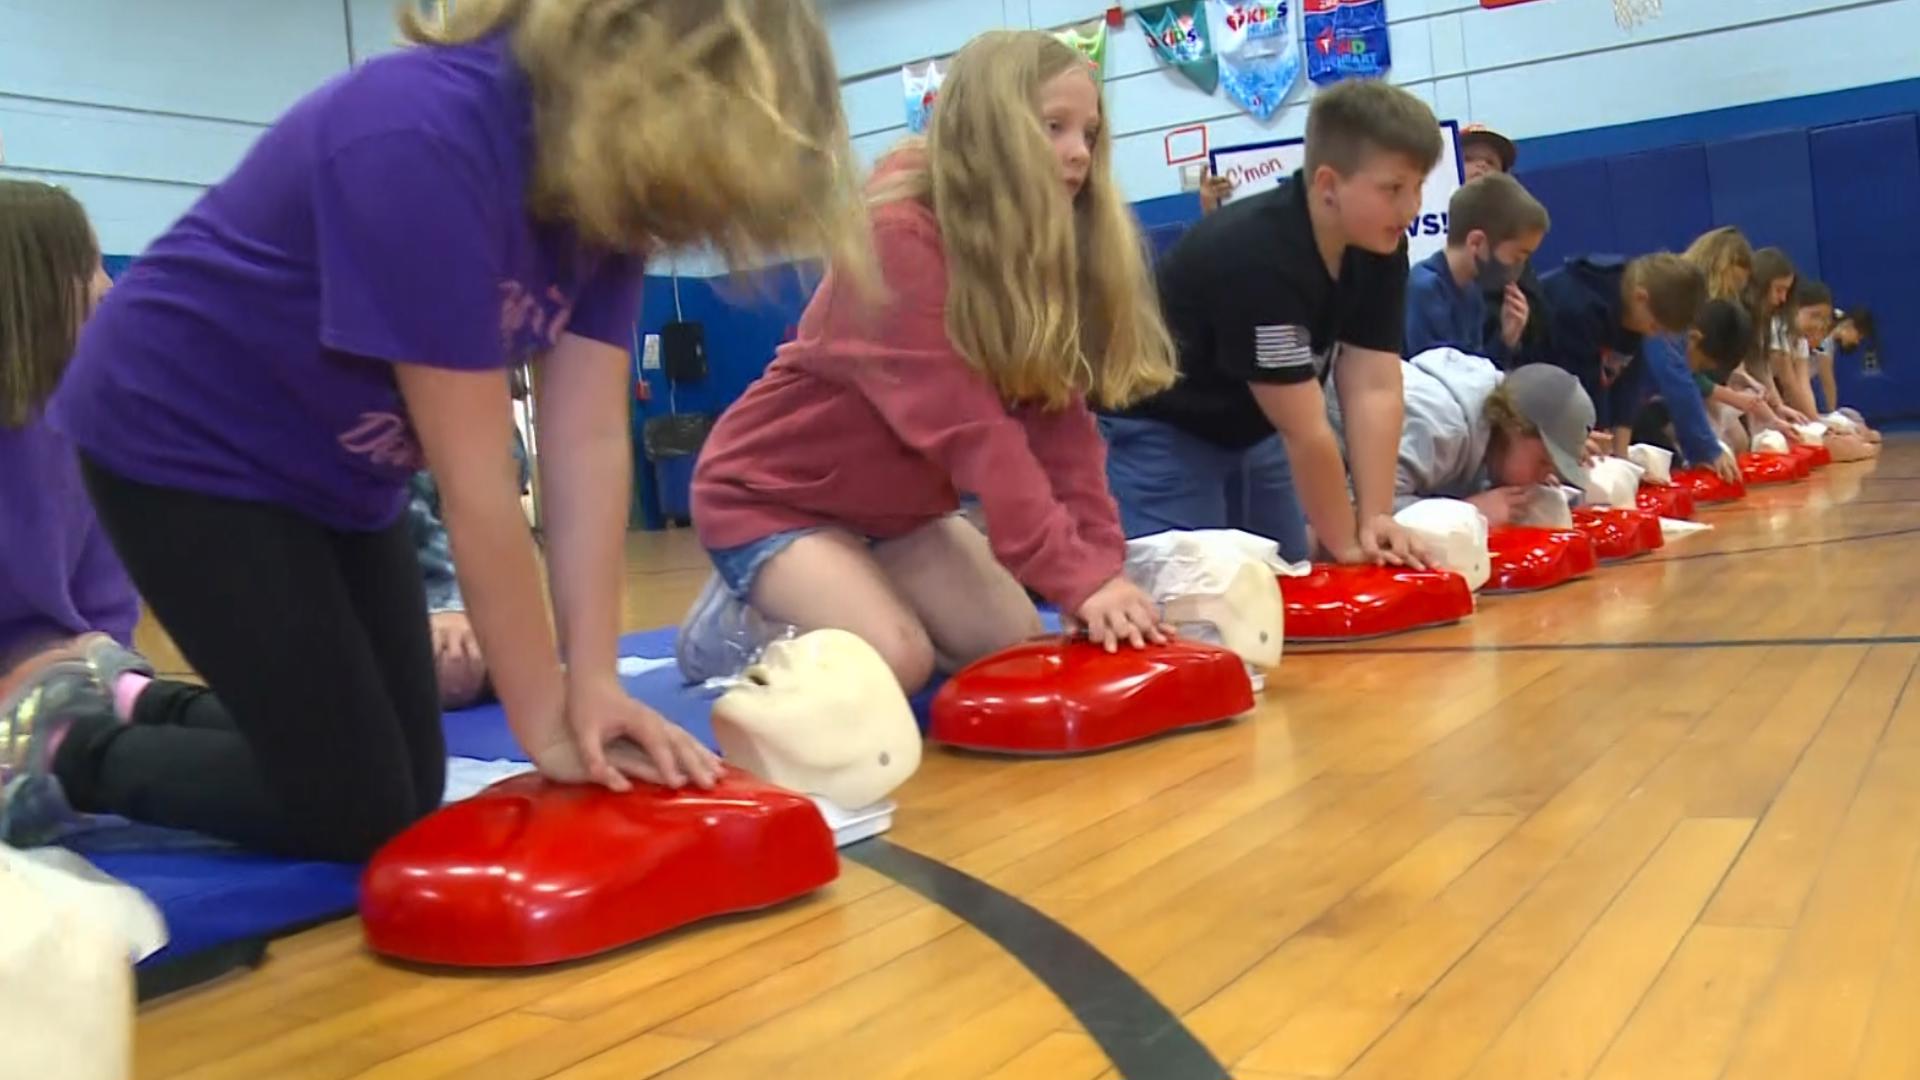 Students at Rock Hill School in Wallingford learn life-saving CPR training from the school nurse.